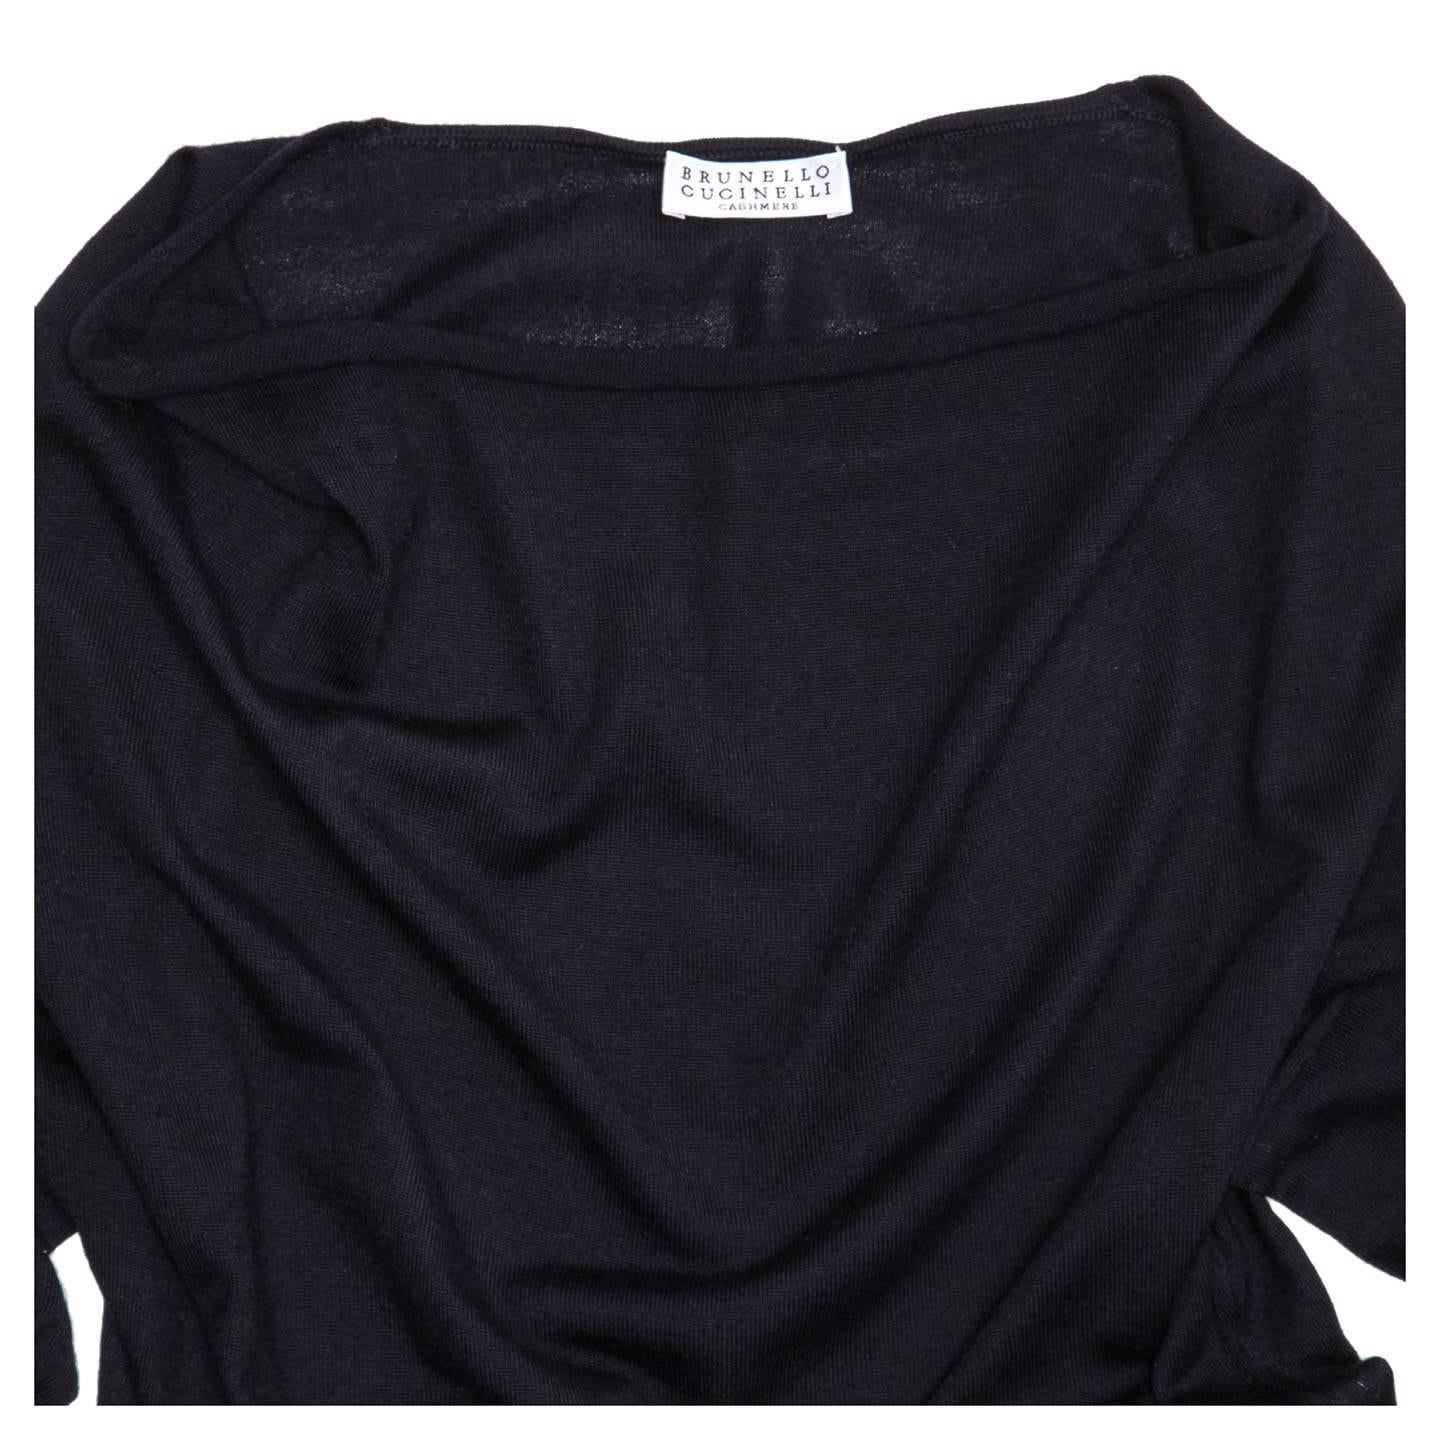 Brunello Cucinelli  Navy Cashmere Long Sweater In Excellent Condition For Sale In Brooklyn, NY